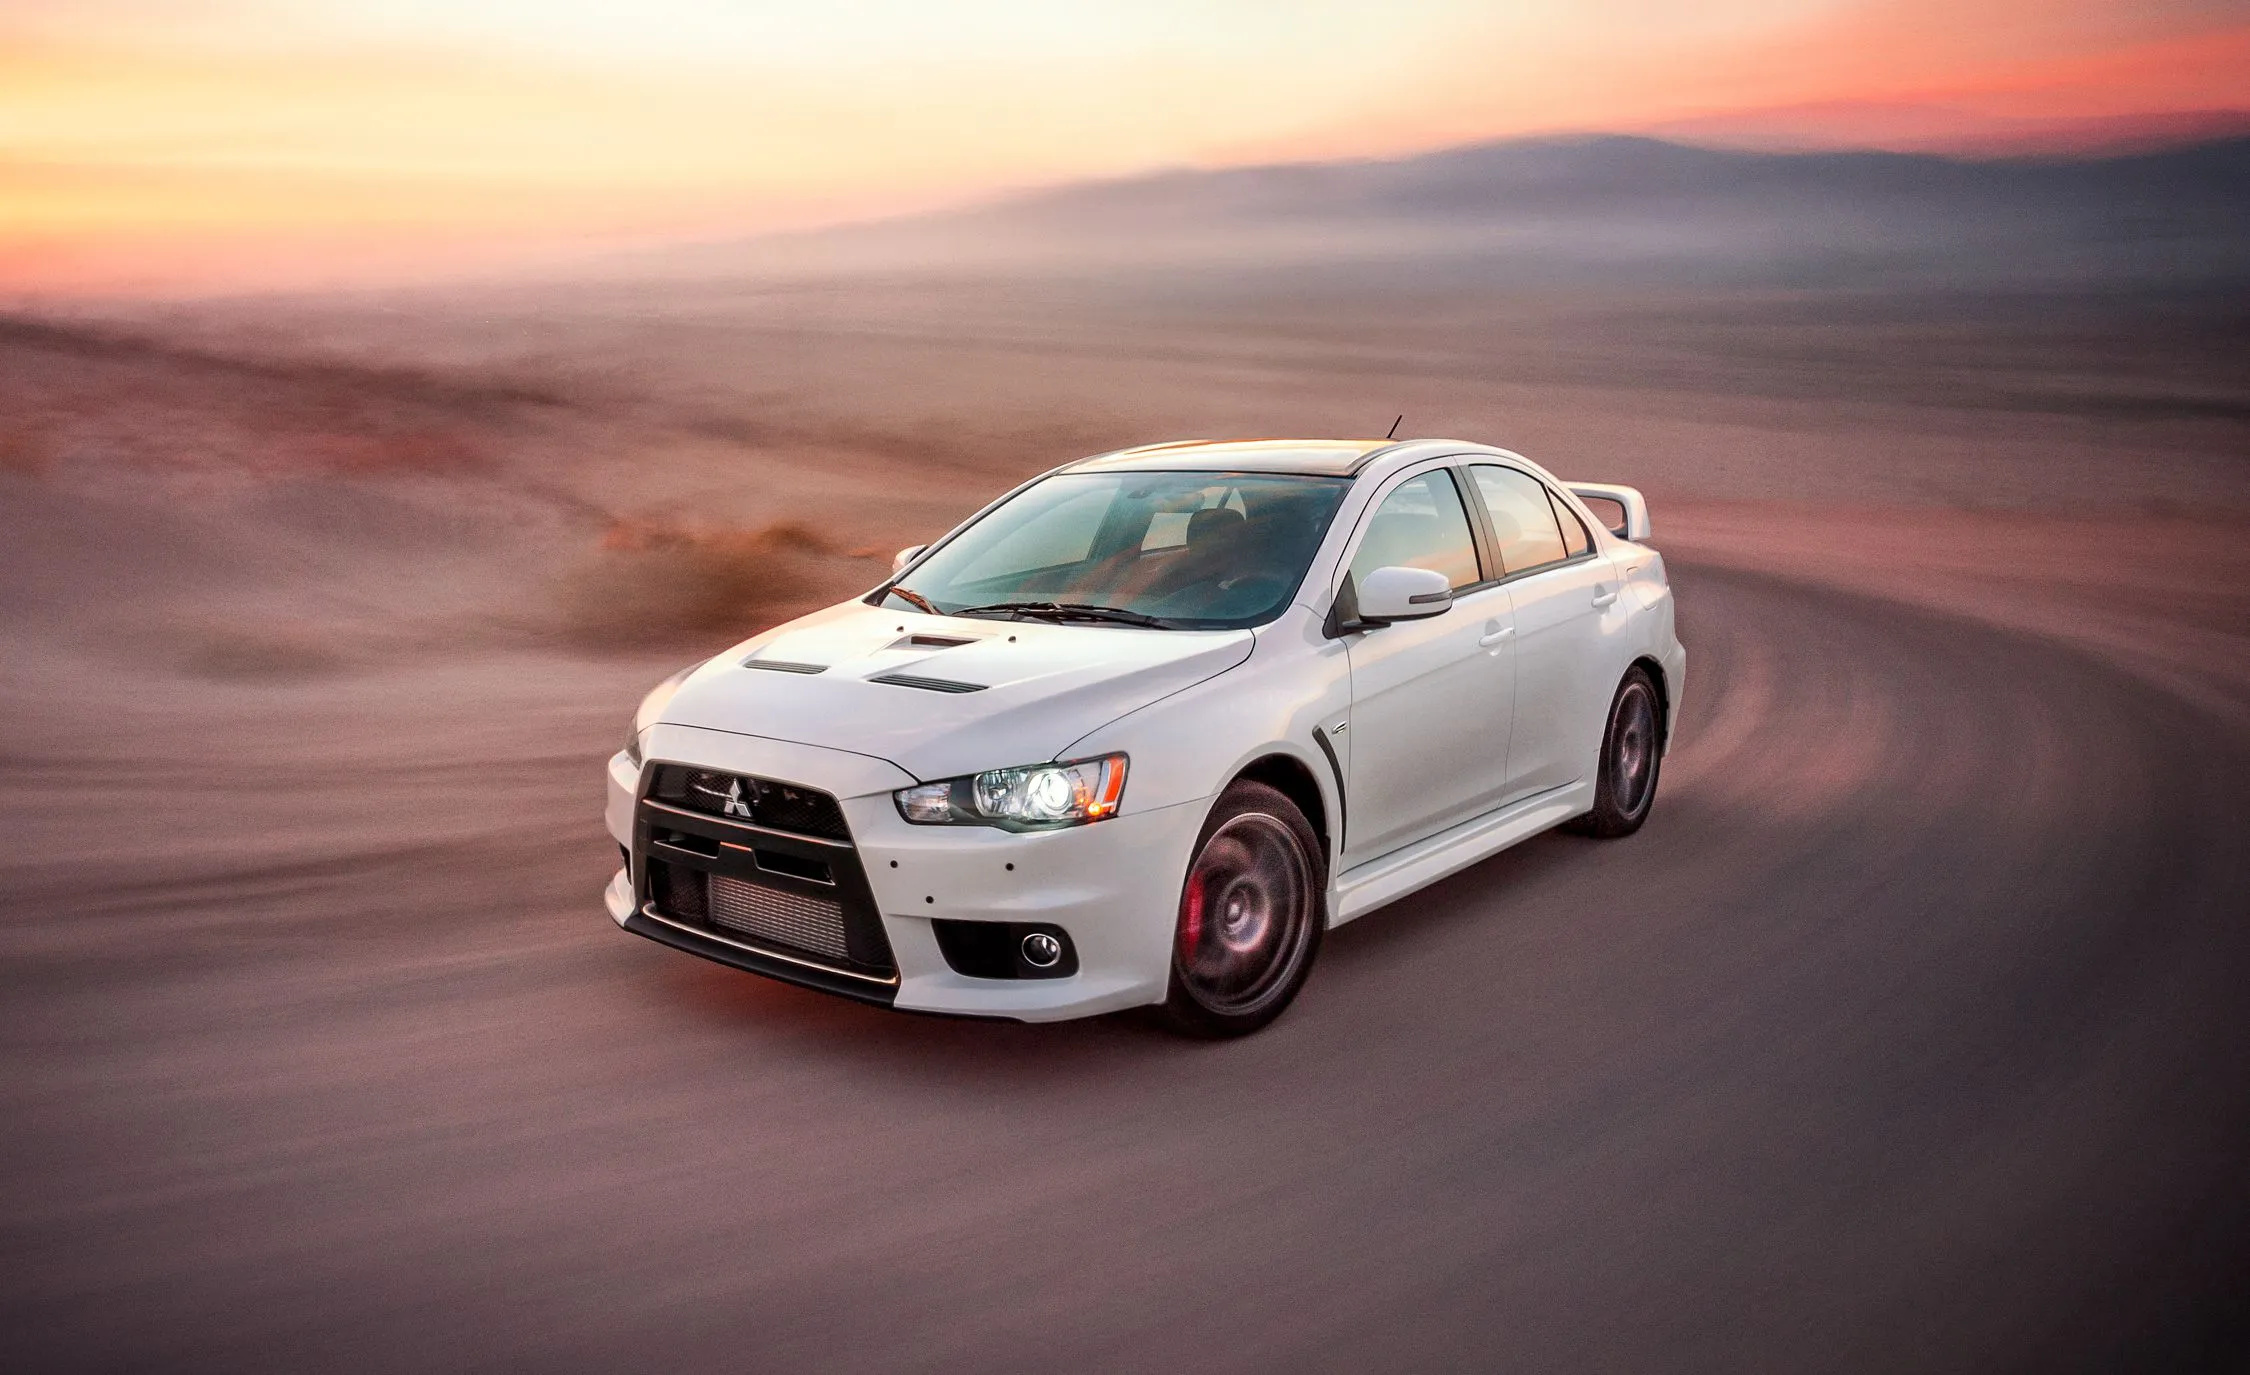 Mitsubishi Lancer Evolution, Features and specs, Performance car, Rally heritage, 2250x1380 HD Desktop